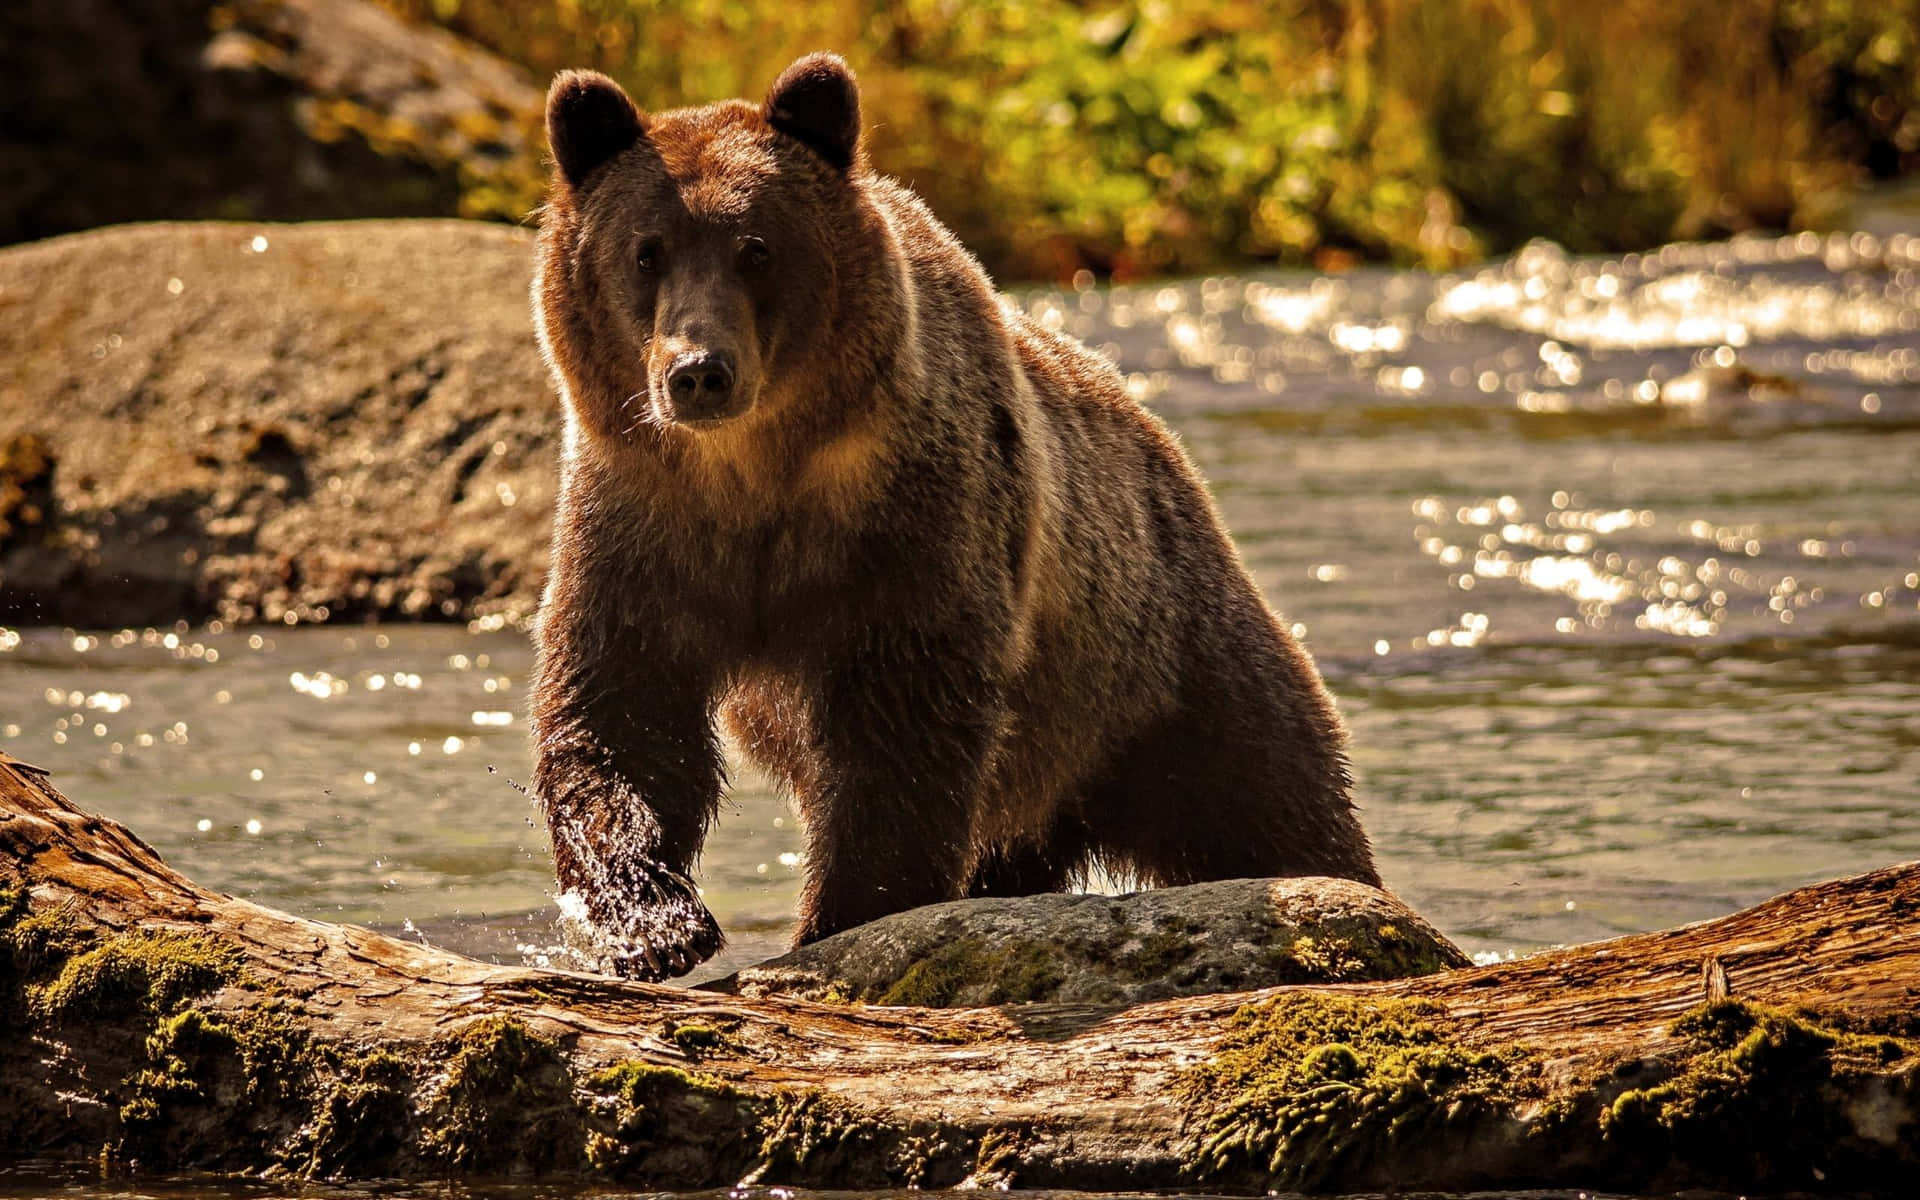 A curious Brown bear looking for adventure